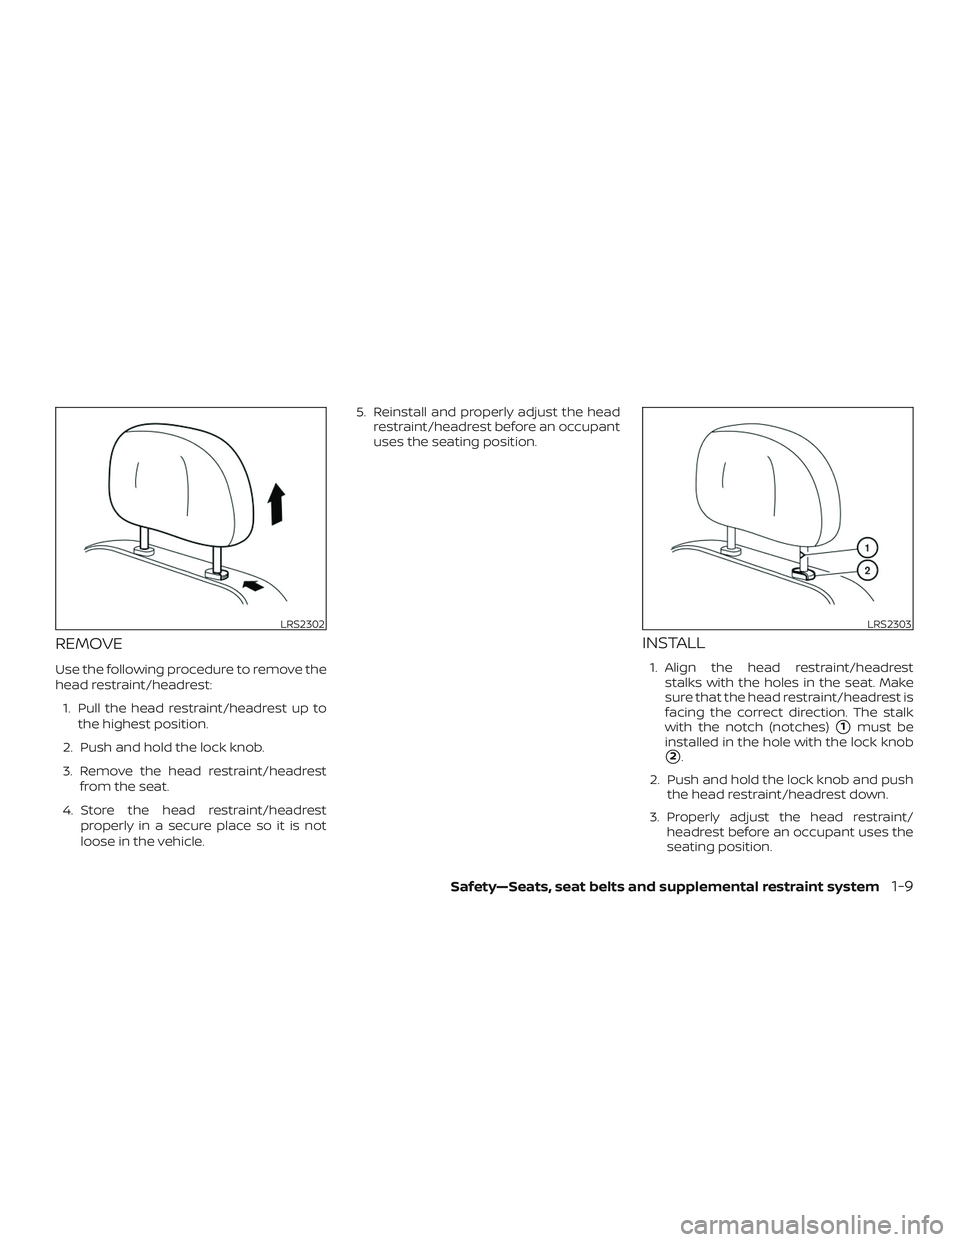 NISSAN MAXIMA 2018  Owner´s Manual REMOVE
Use the following procedure to remove the
head restraint/headrest:1. Pull the head restraint/headrest up to the highest position.
2. Push and hold the lock knob.
3. Remove the head restraint/he